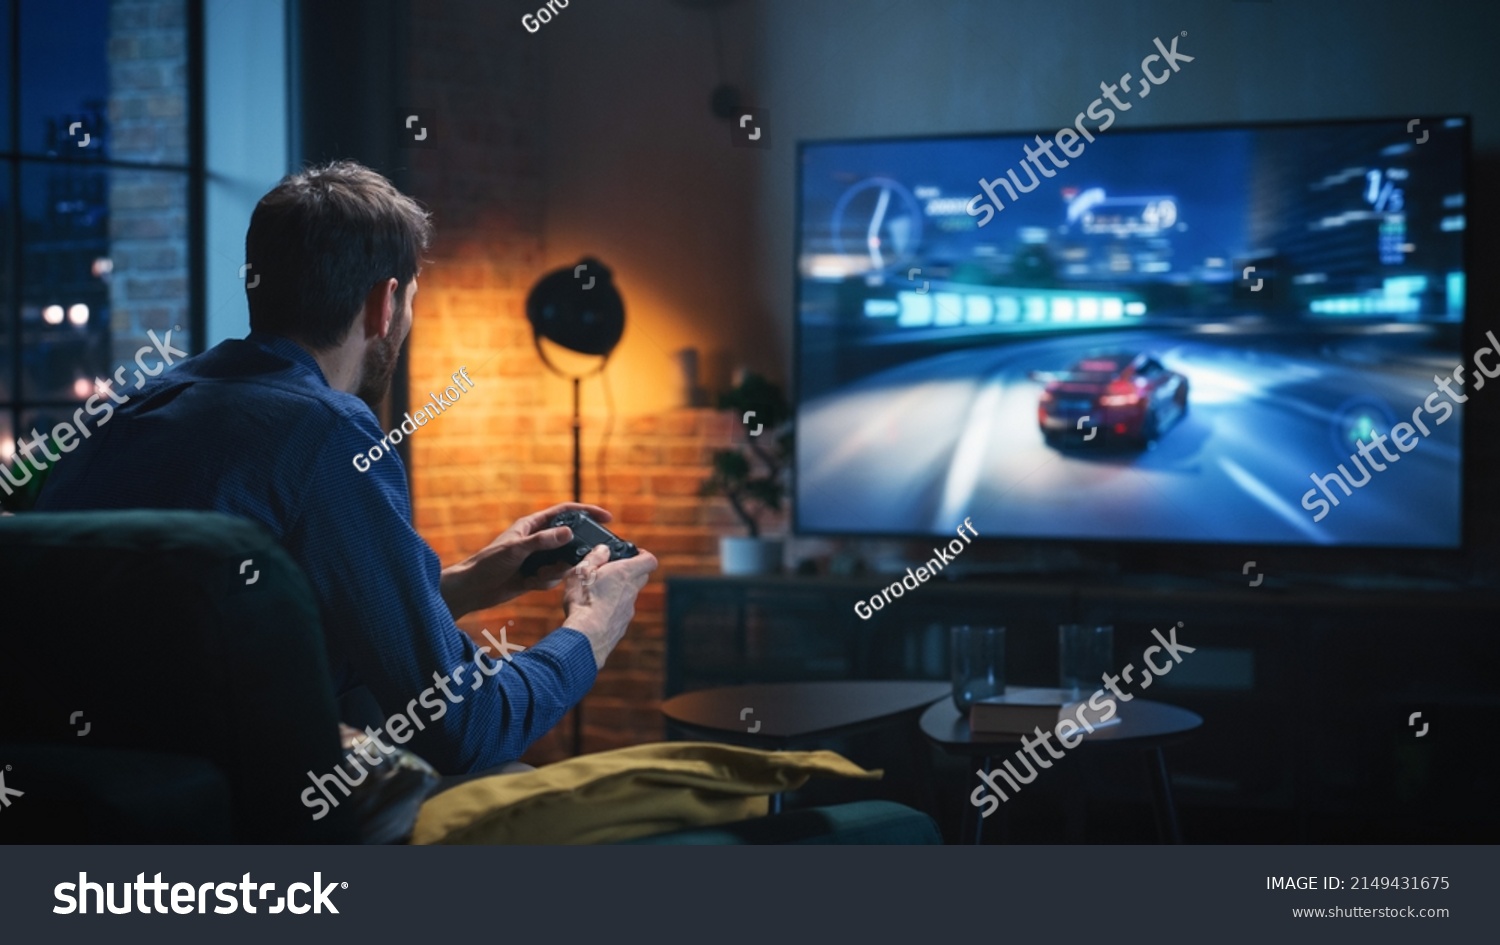 Young Man Spending Time at Home, Sitting on a Couch in Stylish Loft Apartment and Playing Arcade Car Video Games on Console. Male Using Controller to Play Street Racing Drift Simulator. #2149431675